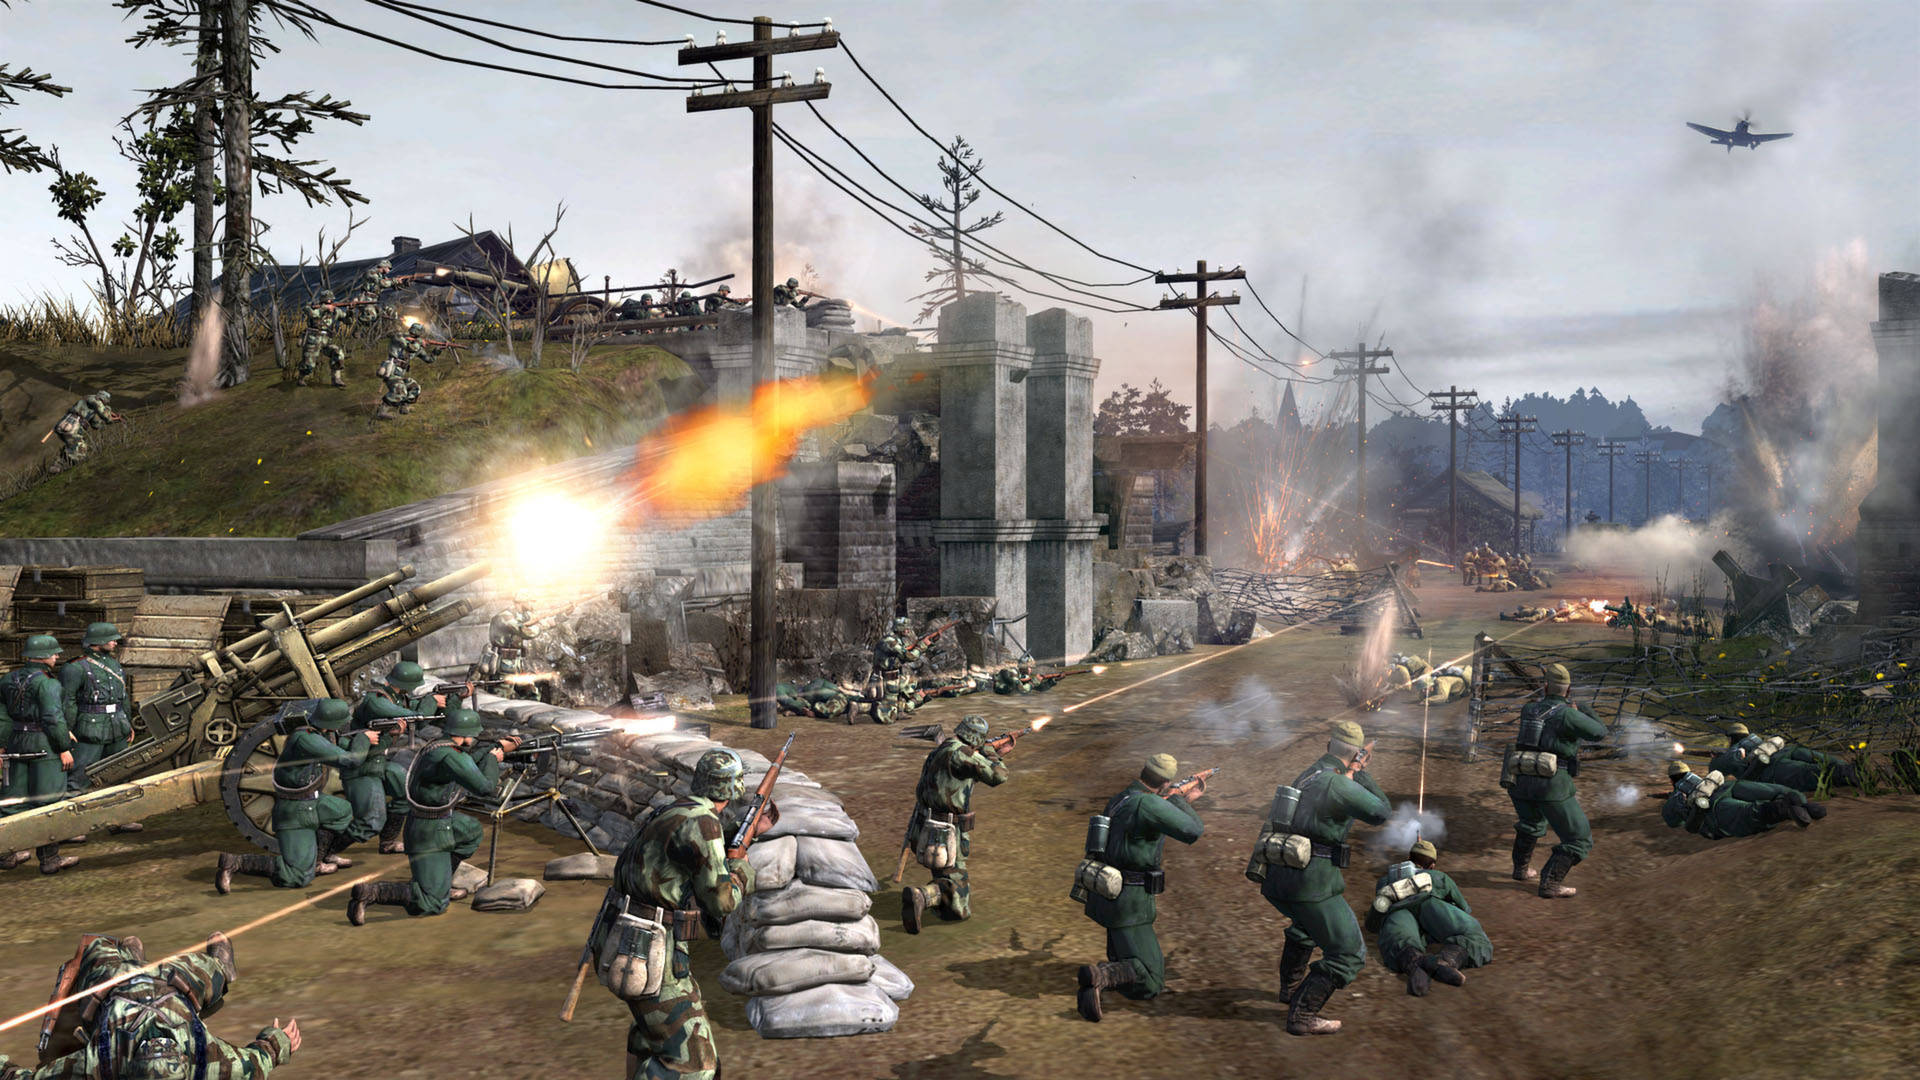 Companyof Heroes 2 Rival Forces - Company Of Heroes 2 Rival Forces Wallpaper